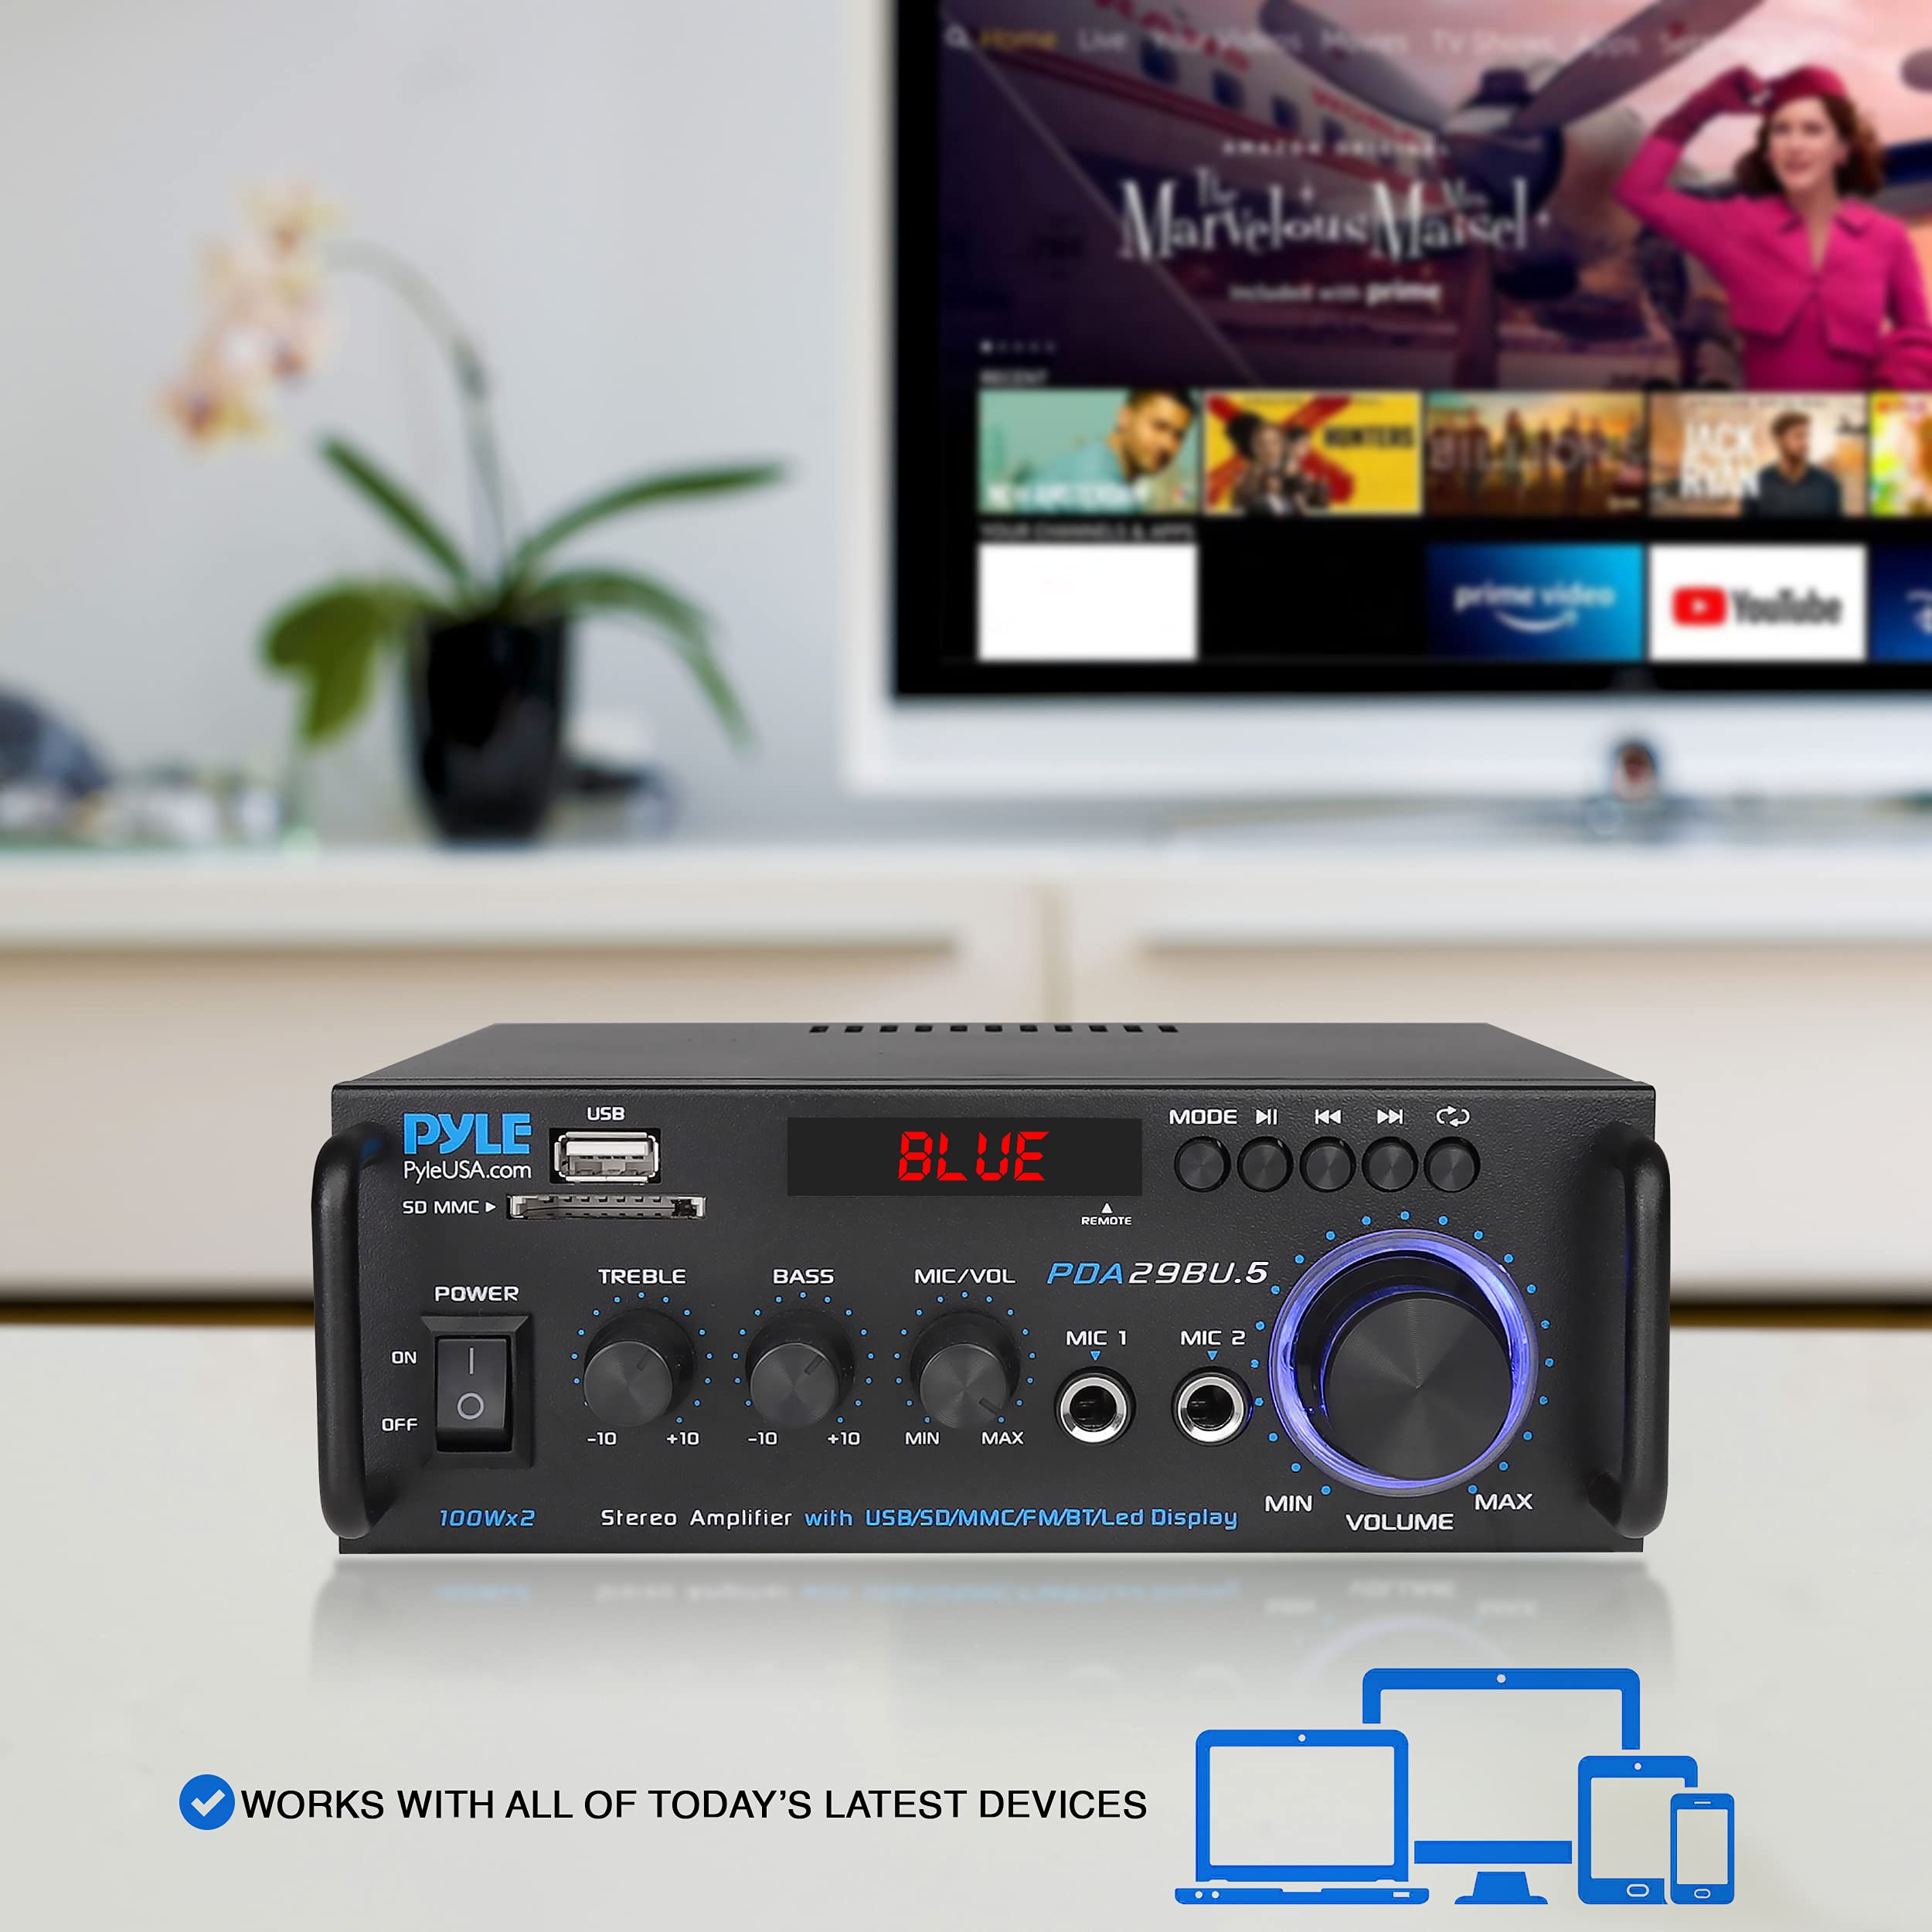 Pyle Wireless Bluetooth Stereo Power Amplifier - 200W Dual Channel Sound Audio Stereo Receiver w/RCA, USB, SD, MIC in, FM Radio, for Home Computer via RCA - PDA29BU.5